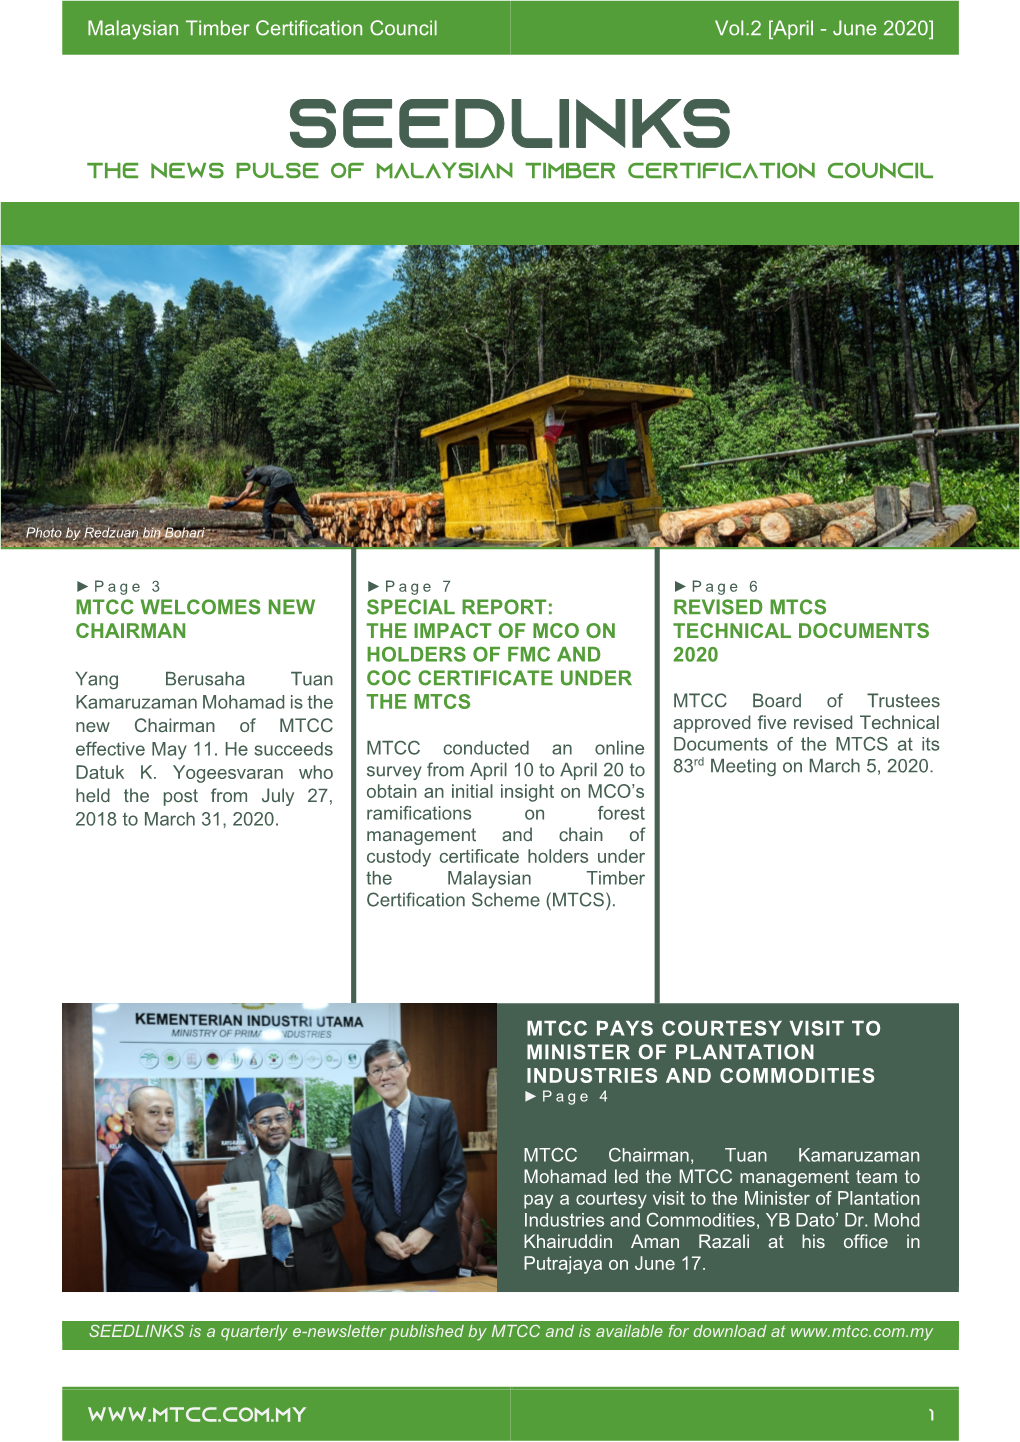 Seedlinks the News Pulse of Malaysian Timber Certification Council